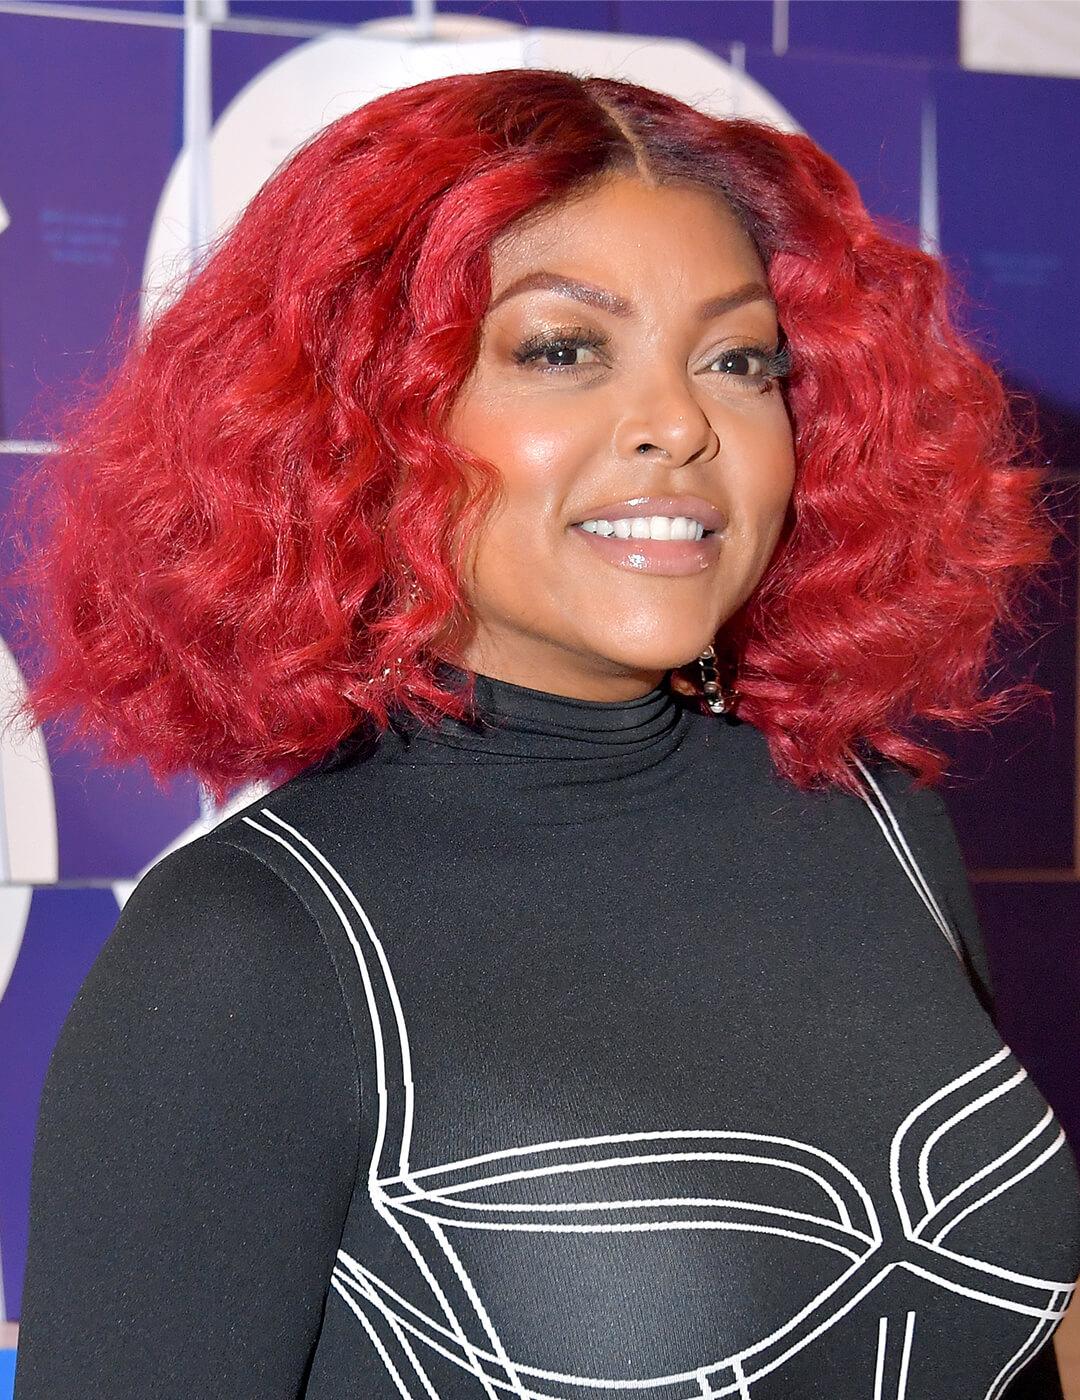 Taraji P. Henson looking bold in a graphic black and white outfit and red, middle-part curly hairstyle